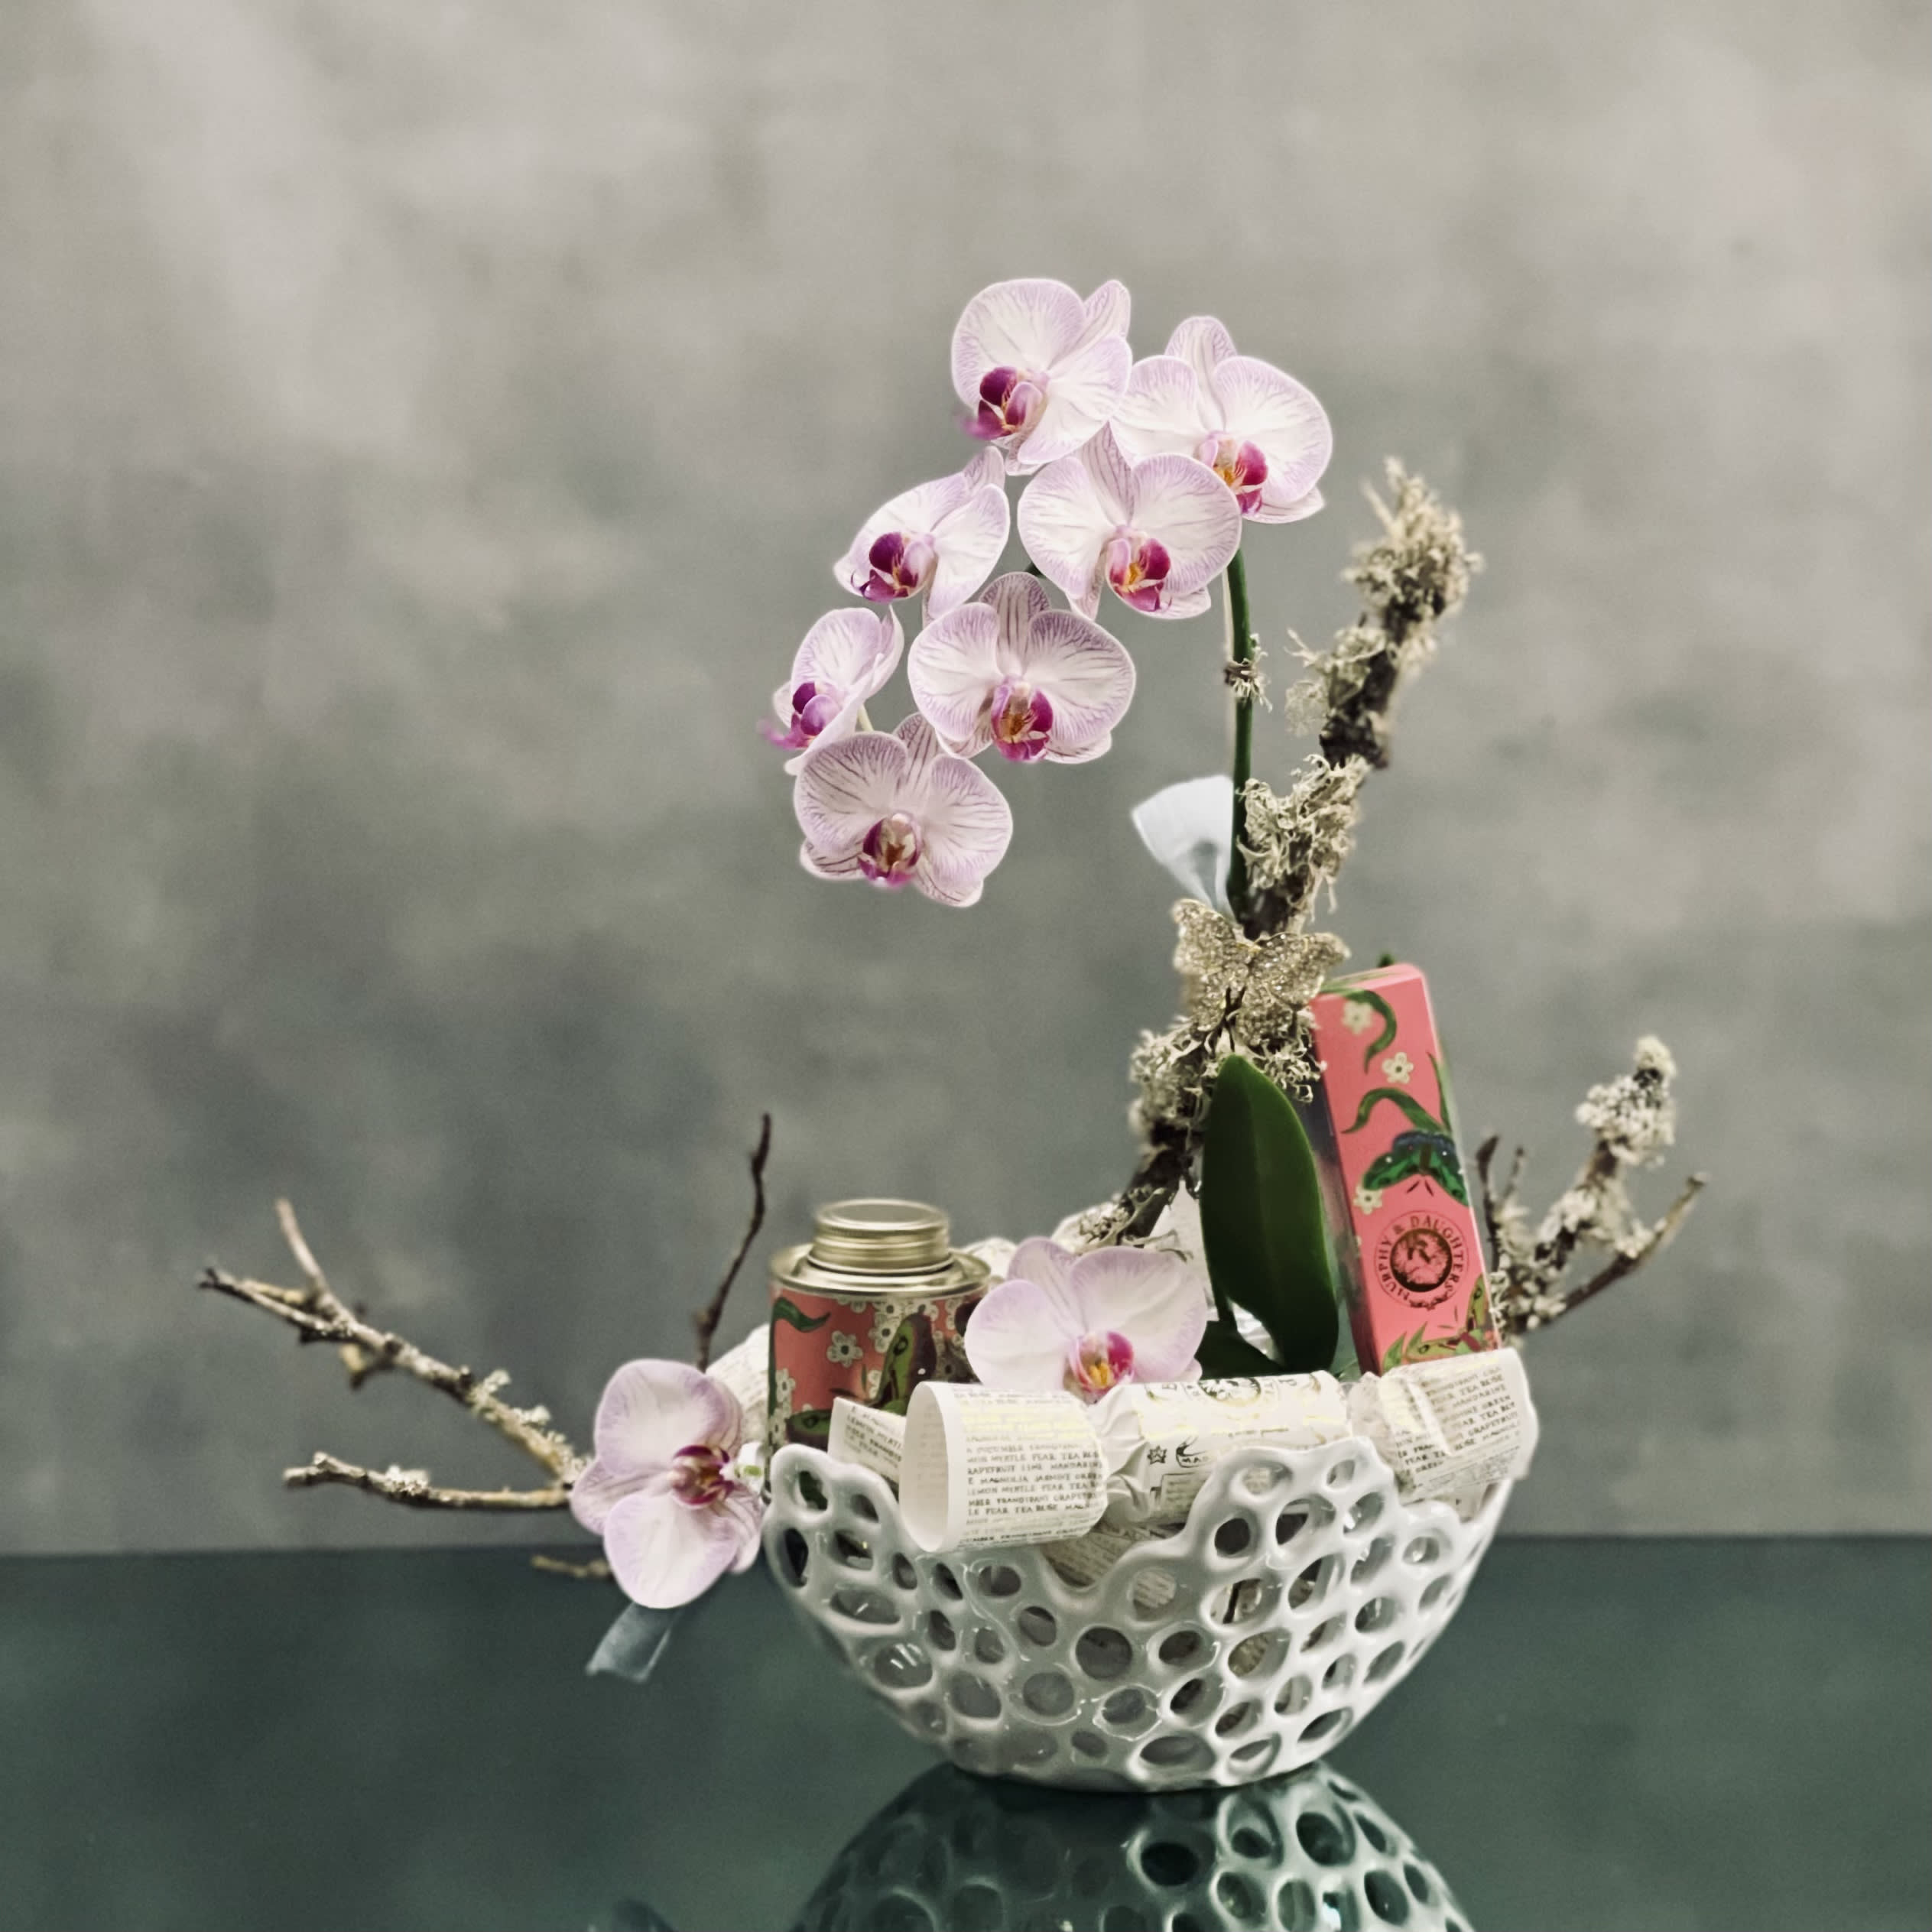 Meditation of Love - Delightful White and purple Orchids and embellished butterfly on branches grace this design held in a white ceramic container. Rose hand cream, 4 bar soaps, and bottle of bath salt included in this beautiful arrangement. 